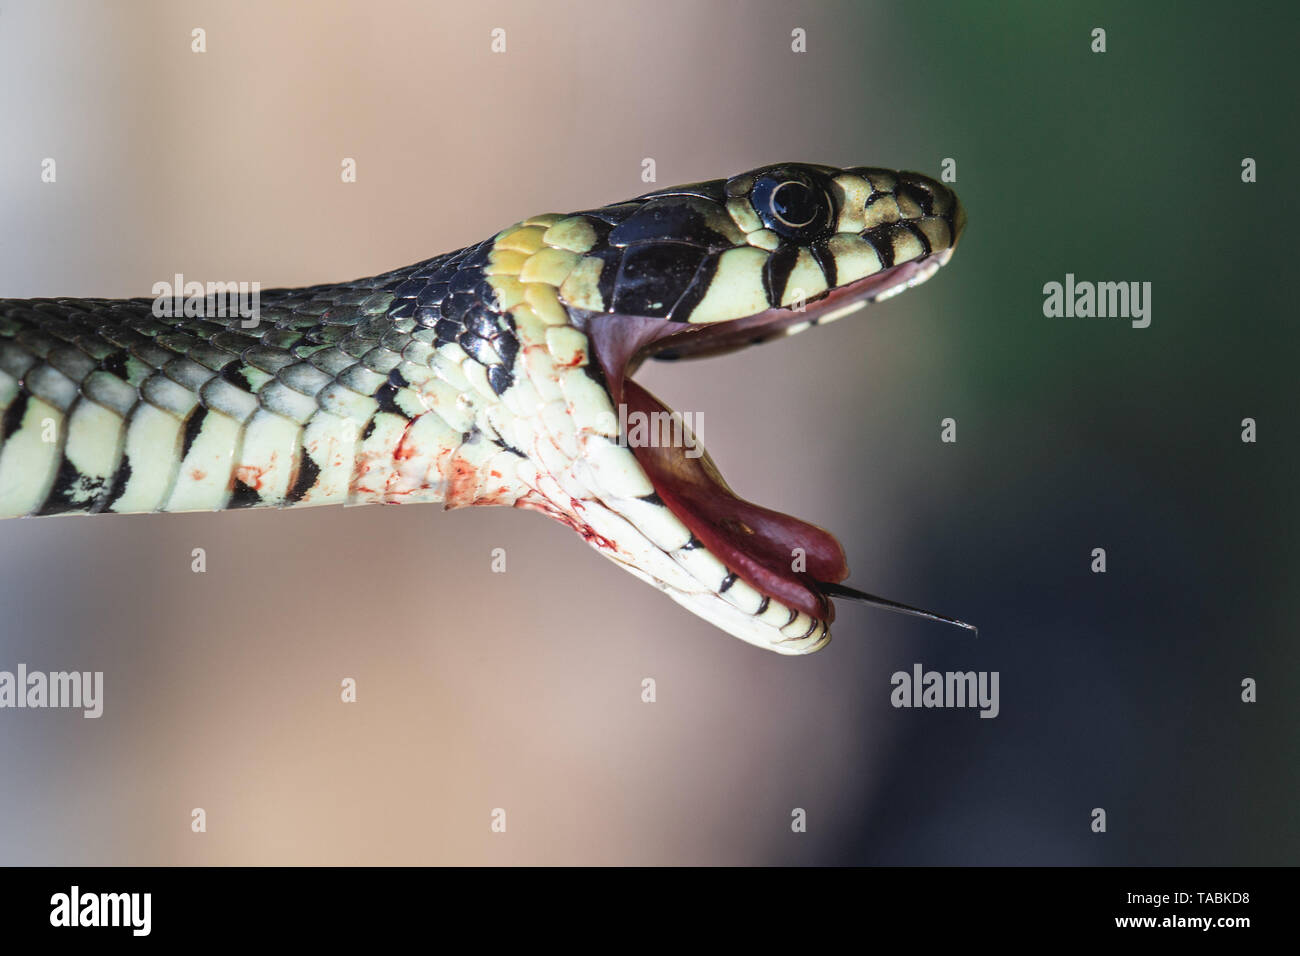 Bloody Grass snake (Natrix natrix) with open mouth and tongue out Stock Photo